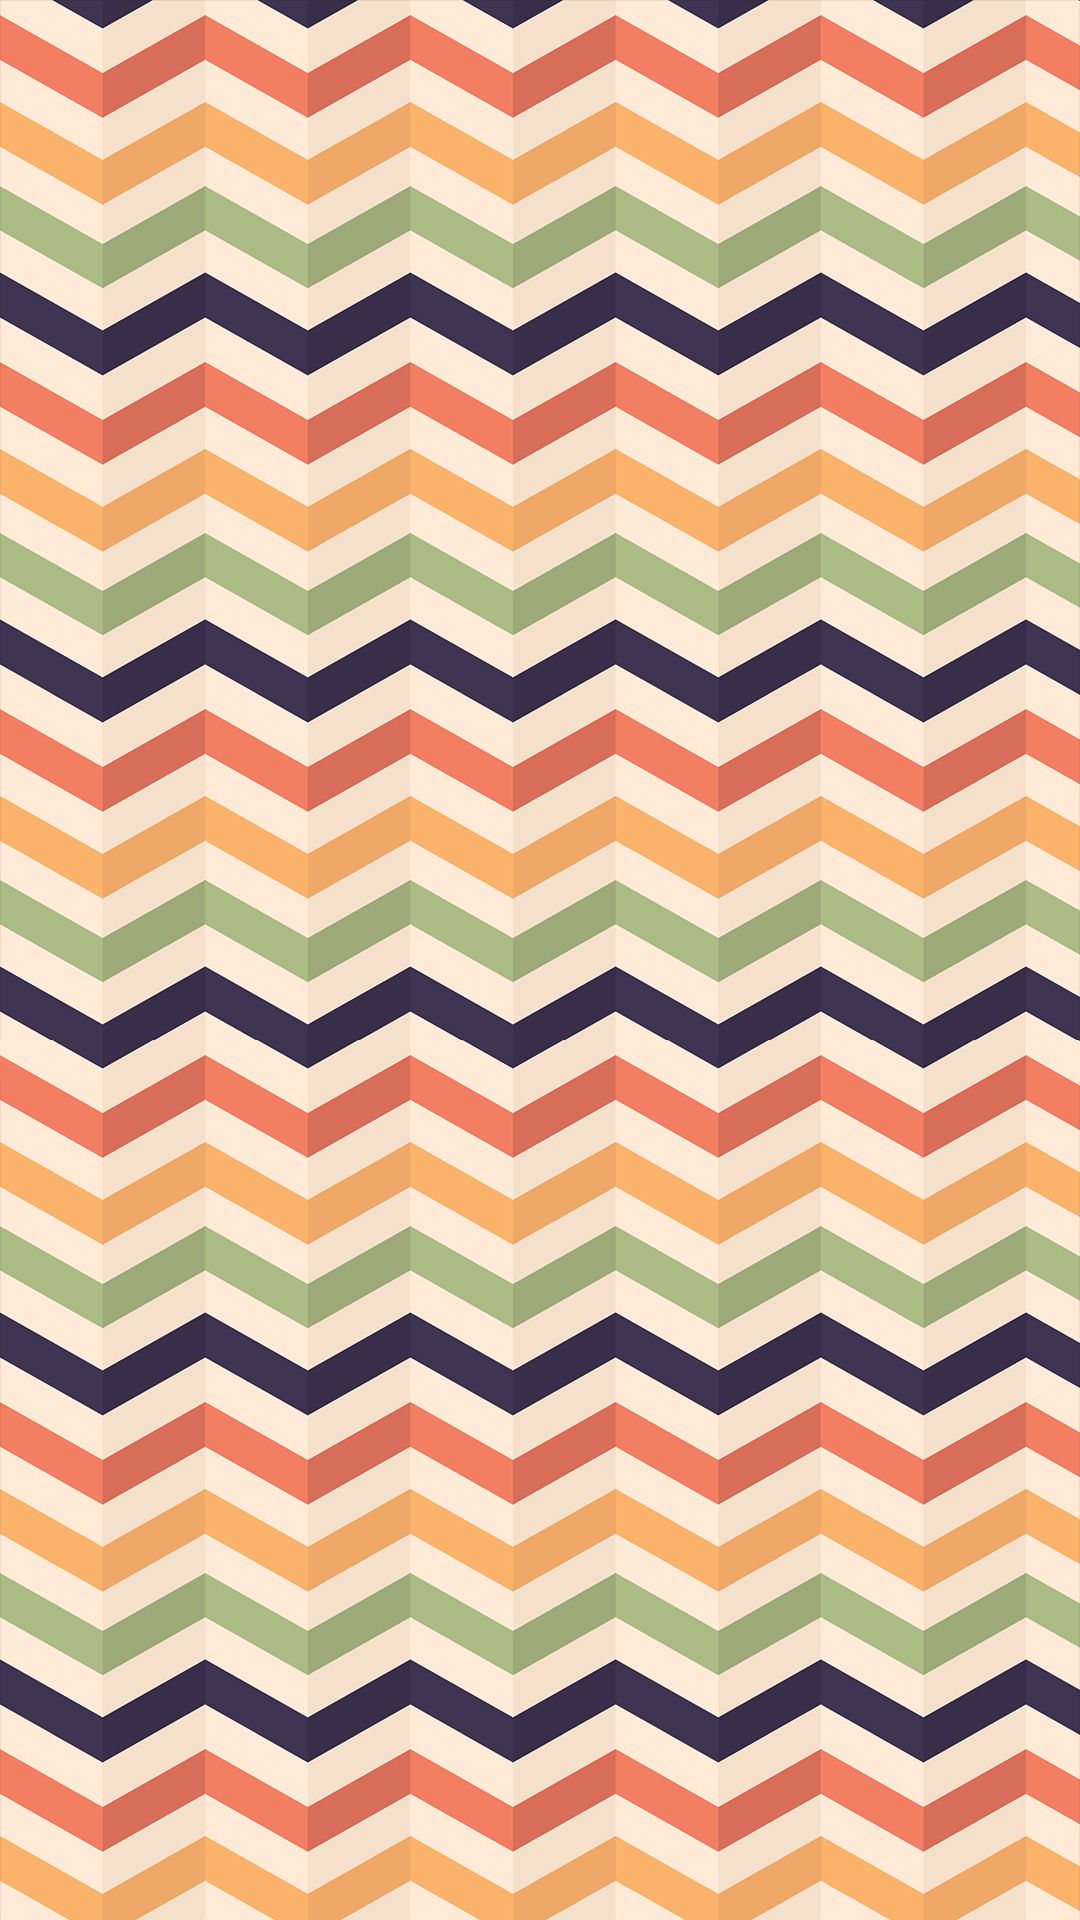 Stripe Iphone Wallpapers